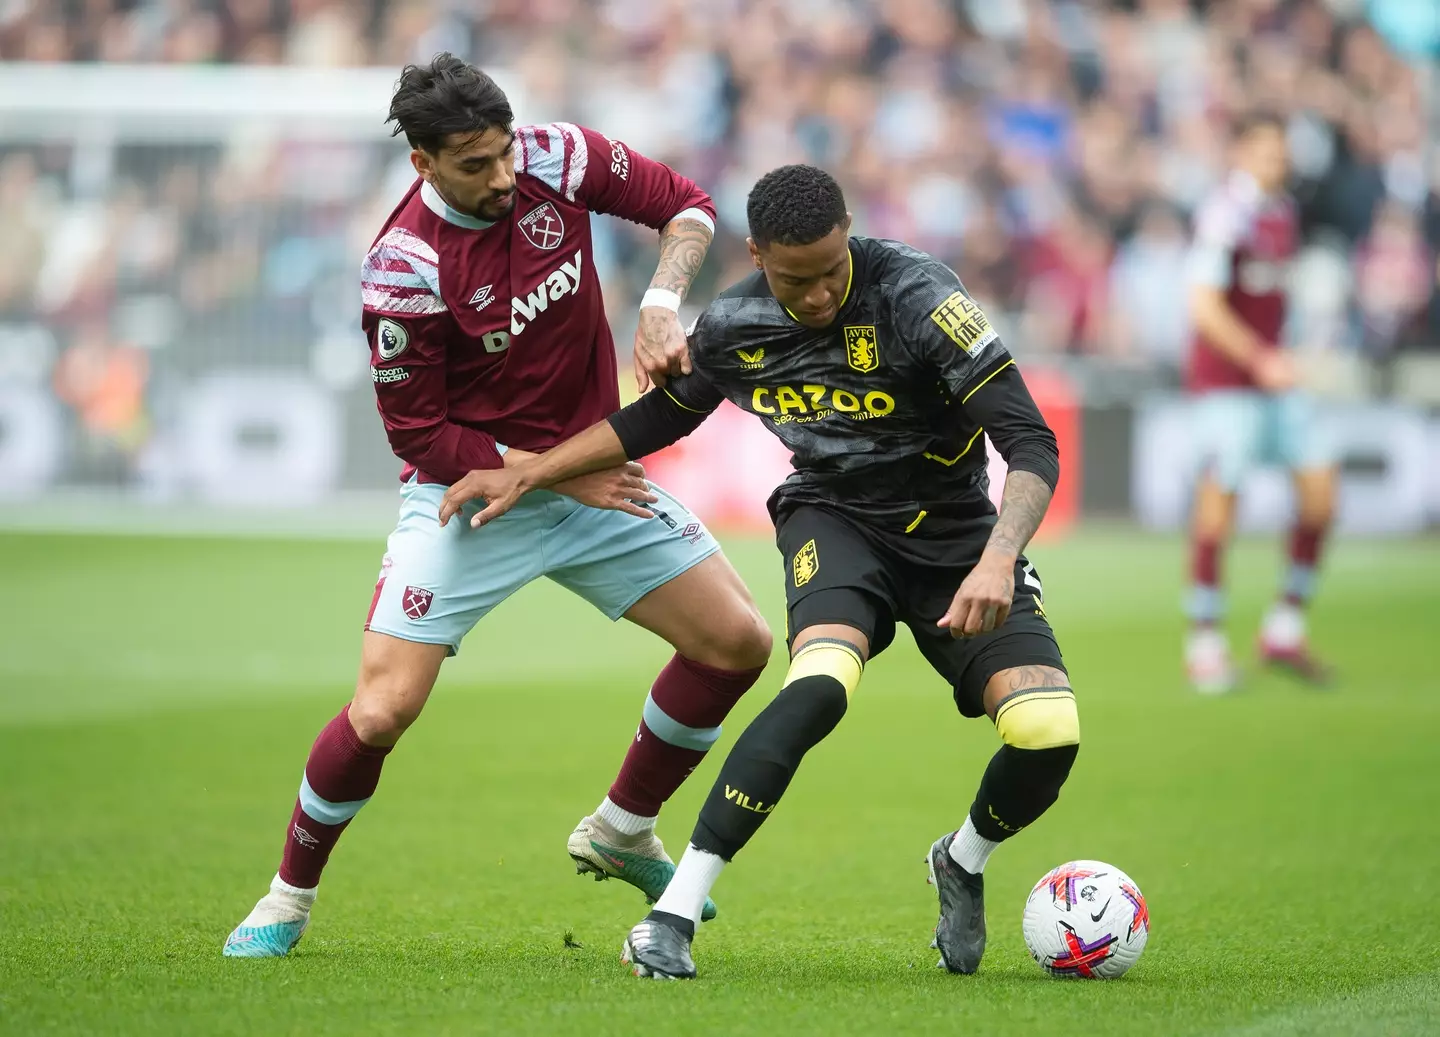 Lucas Paqueta in action for West Ham United against Aston Villa. Image: Getty